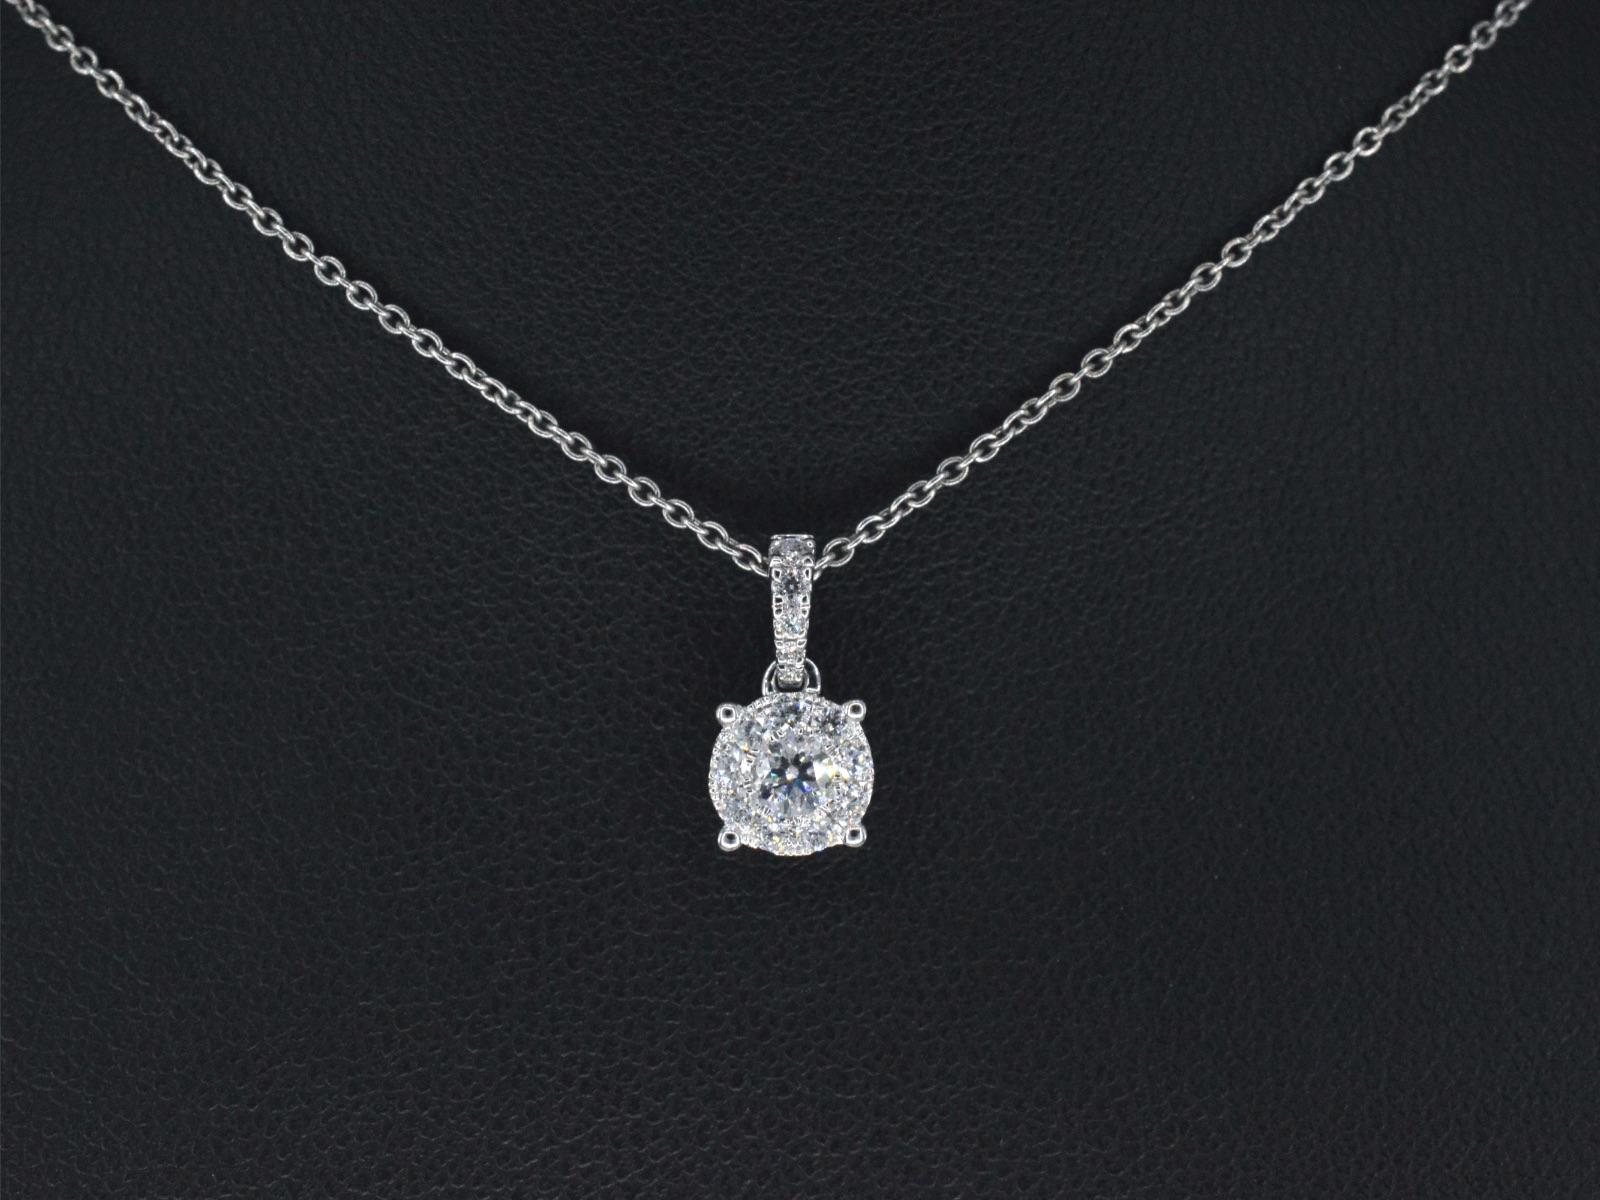 This exquisite pendant features naturally shiny diamonds, weighing 0.45 carats, with a brilliant cut that enhances their sparkle. The diamonds boast a color range of F-G, a clarity of VS, and a very good grinding quality, ensuring their